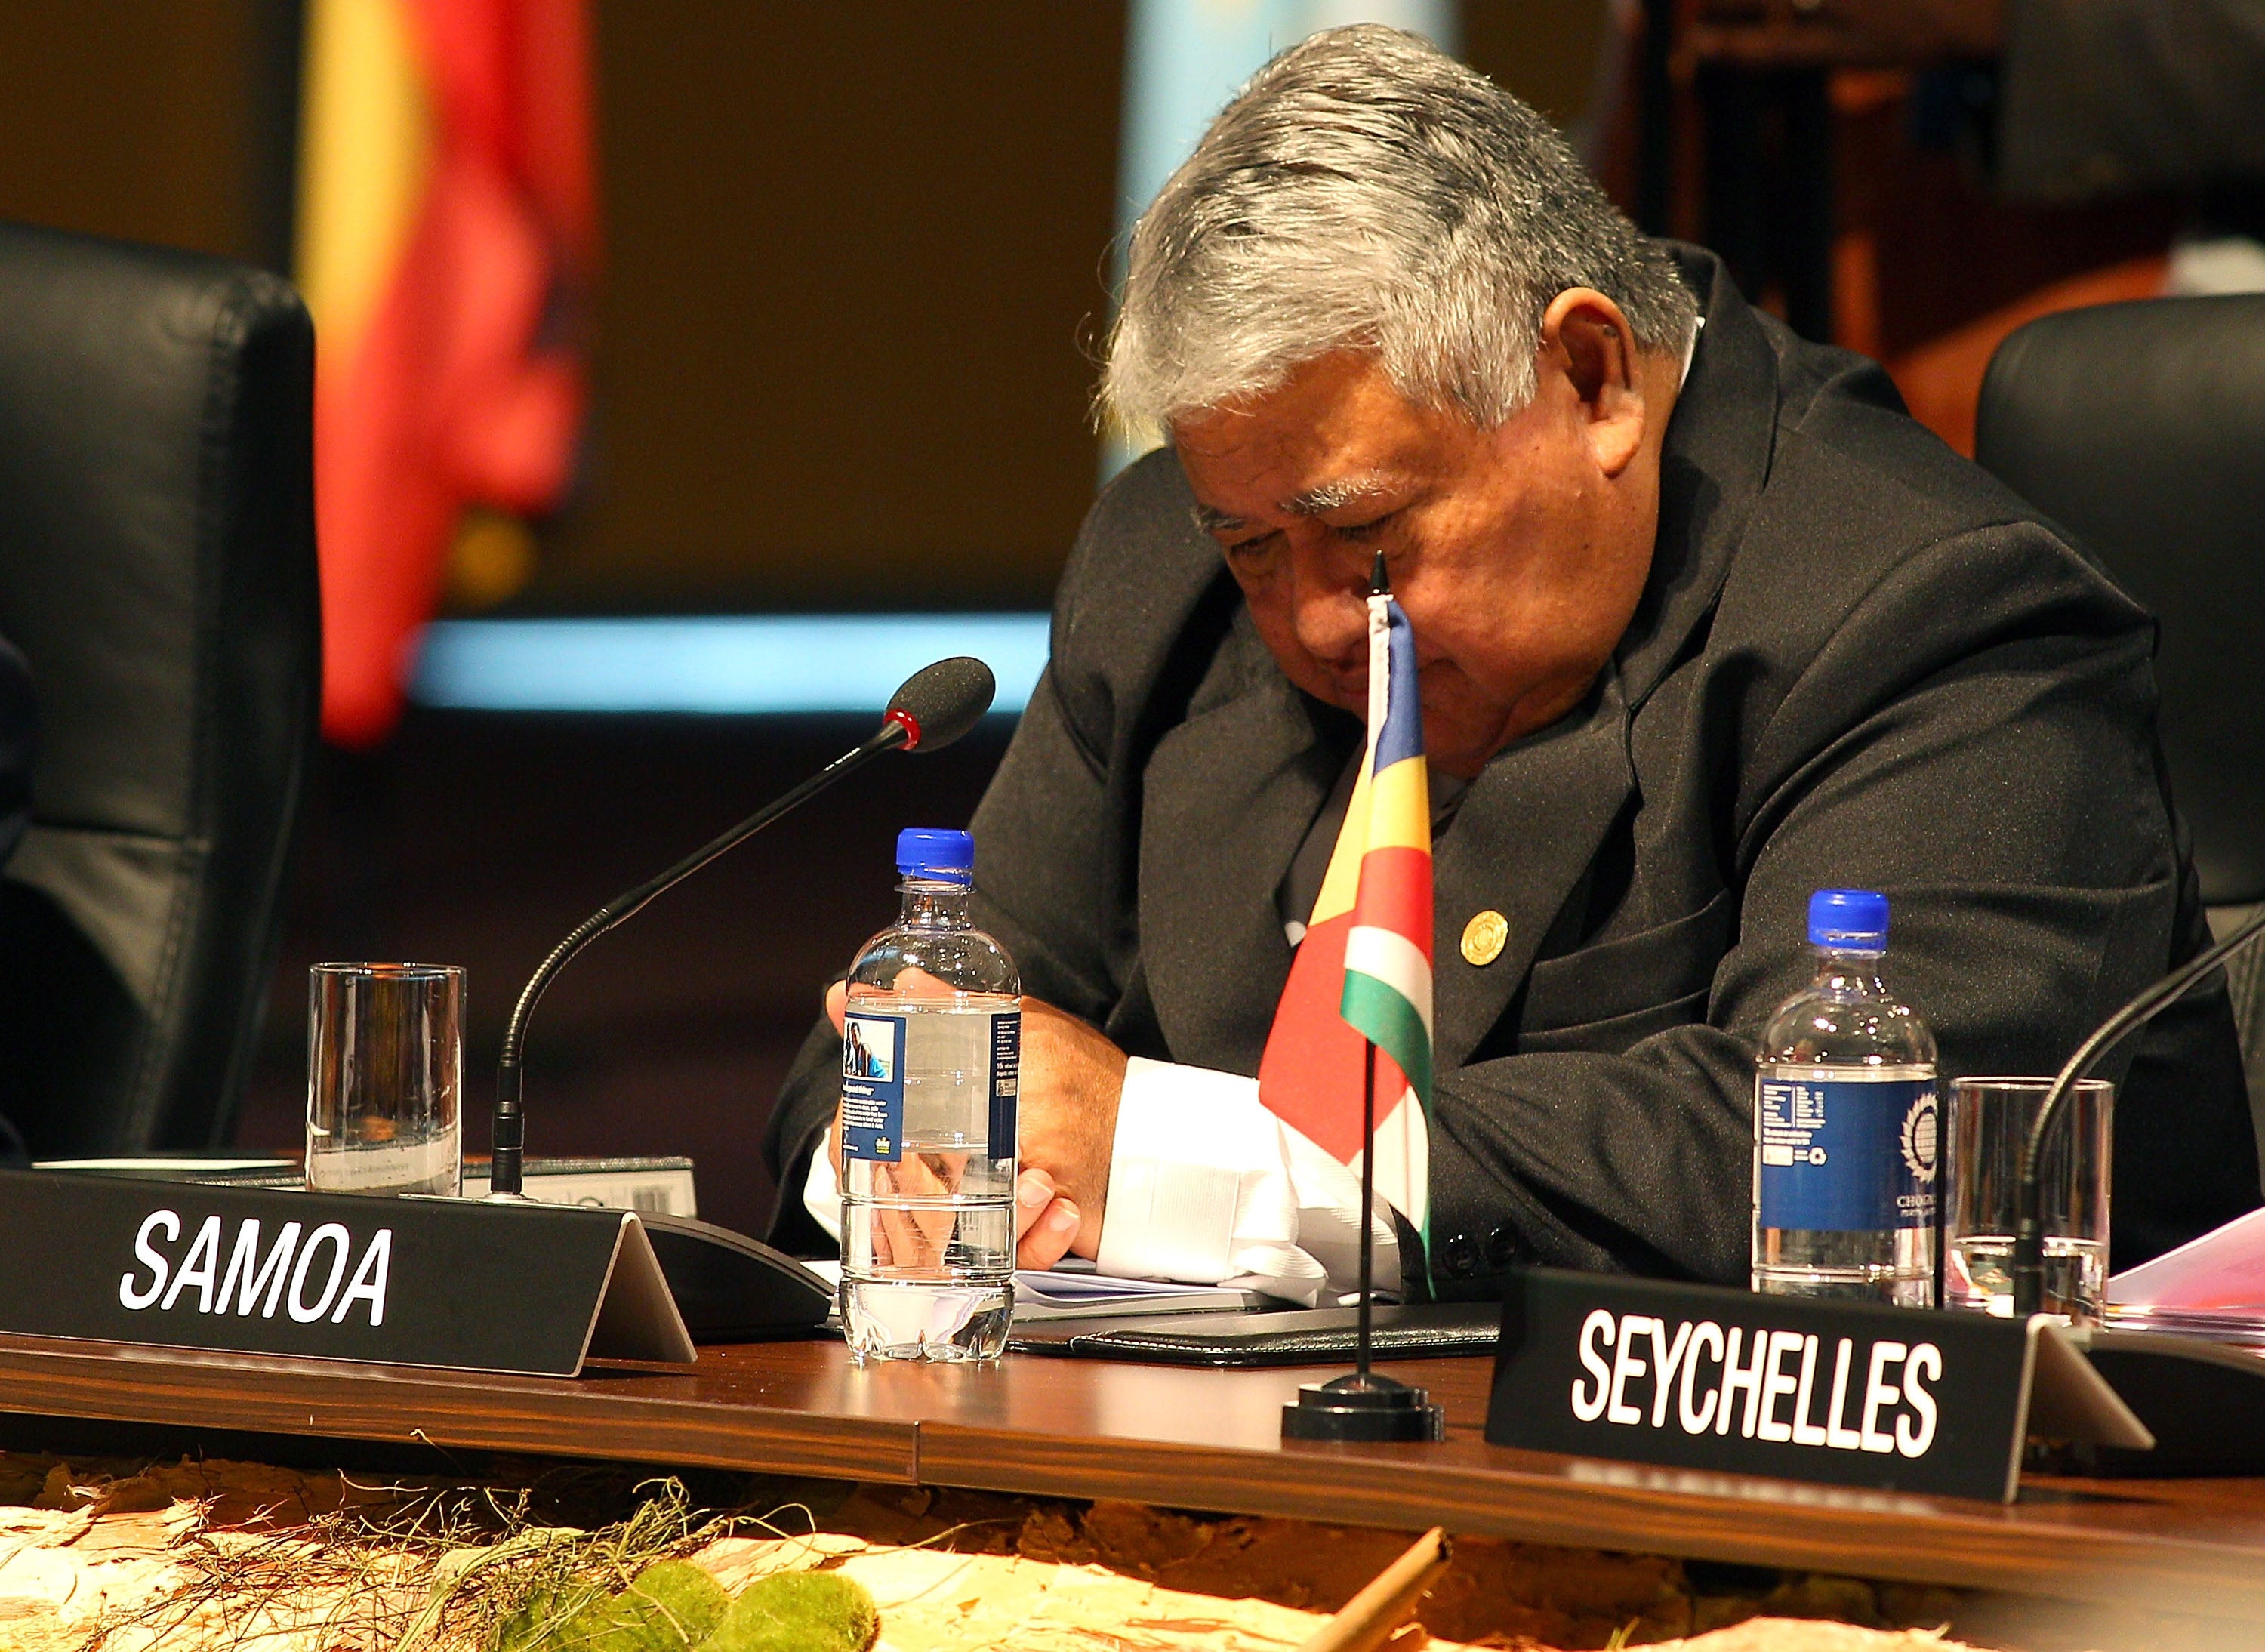 <p>File image of Samoa’s Prime Minister Tuilaepa Sailele Malielegaoi who says he will remain in office, despite order by the country’s Supreme Court that lawmakers sit to appoint a new leader</p>